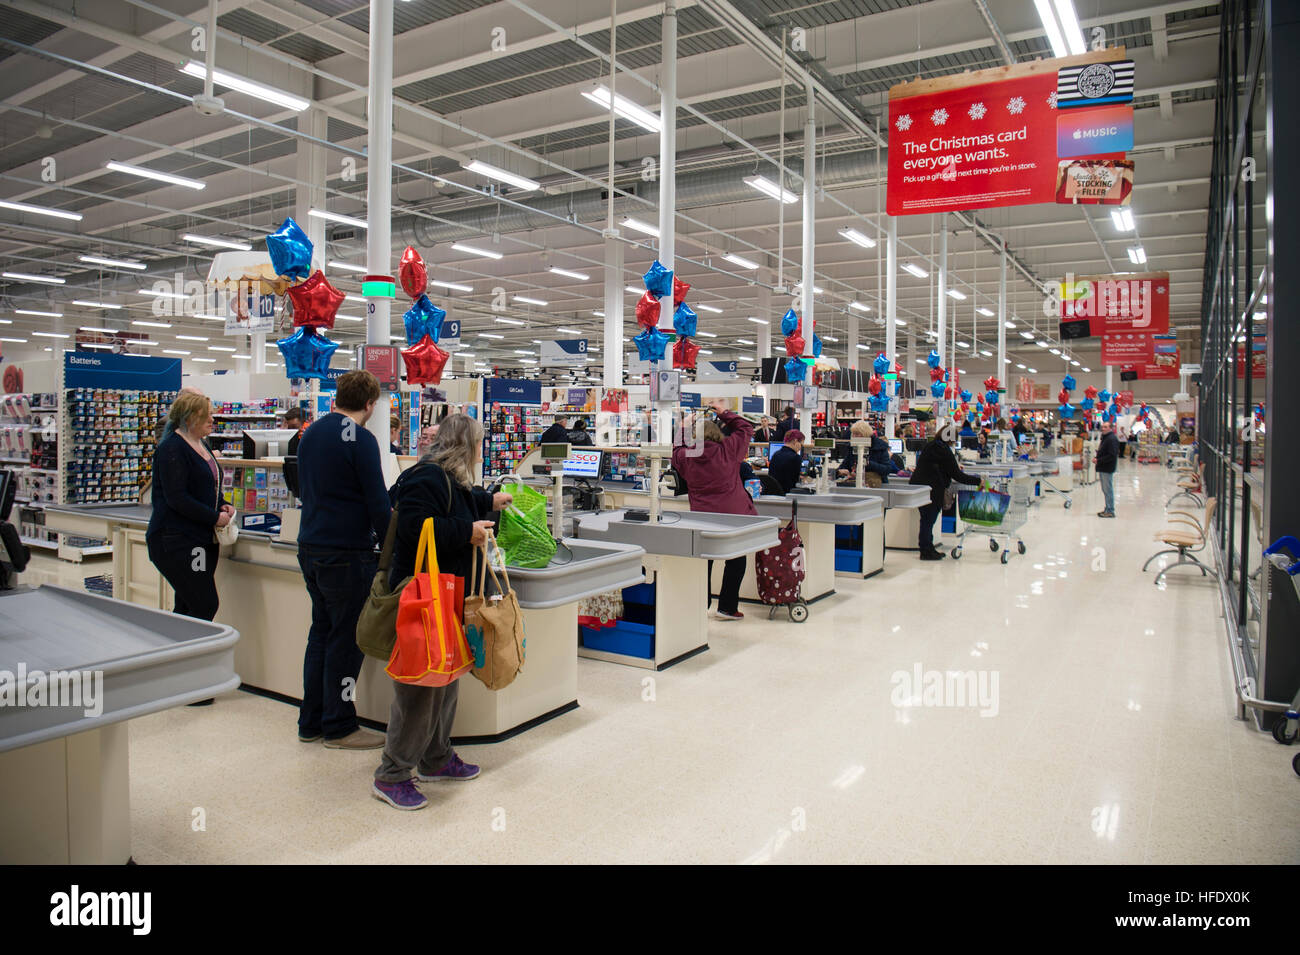 Supermarket checkout: People shopping in the Tesco supermarket superstore, Aberystwyth Wales UK (on the opening day of the store 24 November 2016) Stock Photo